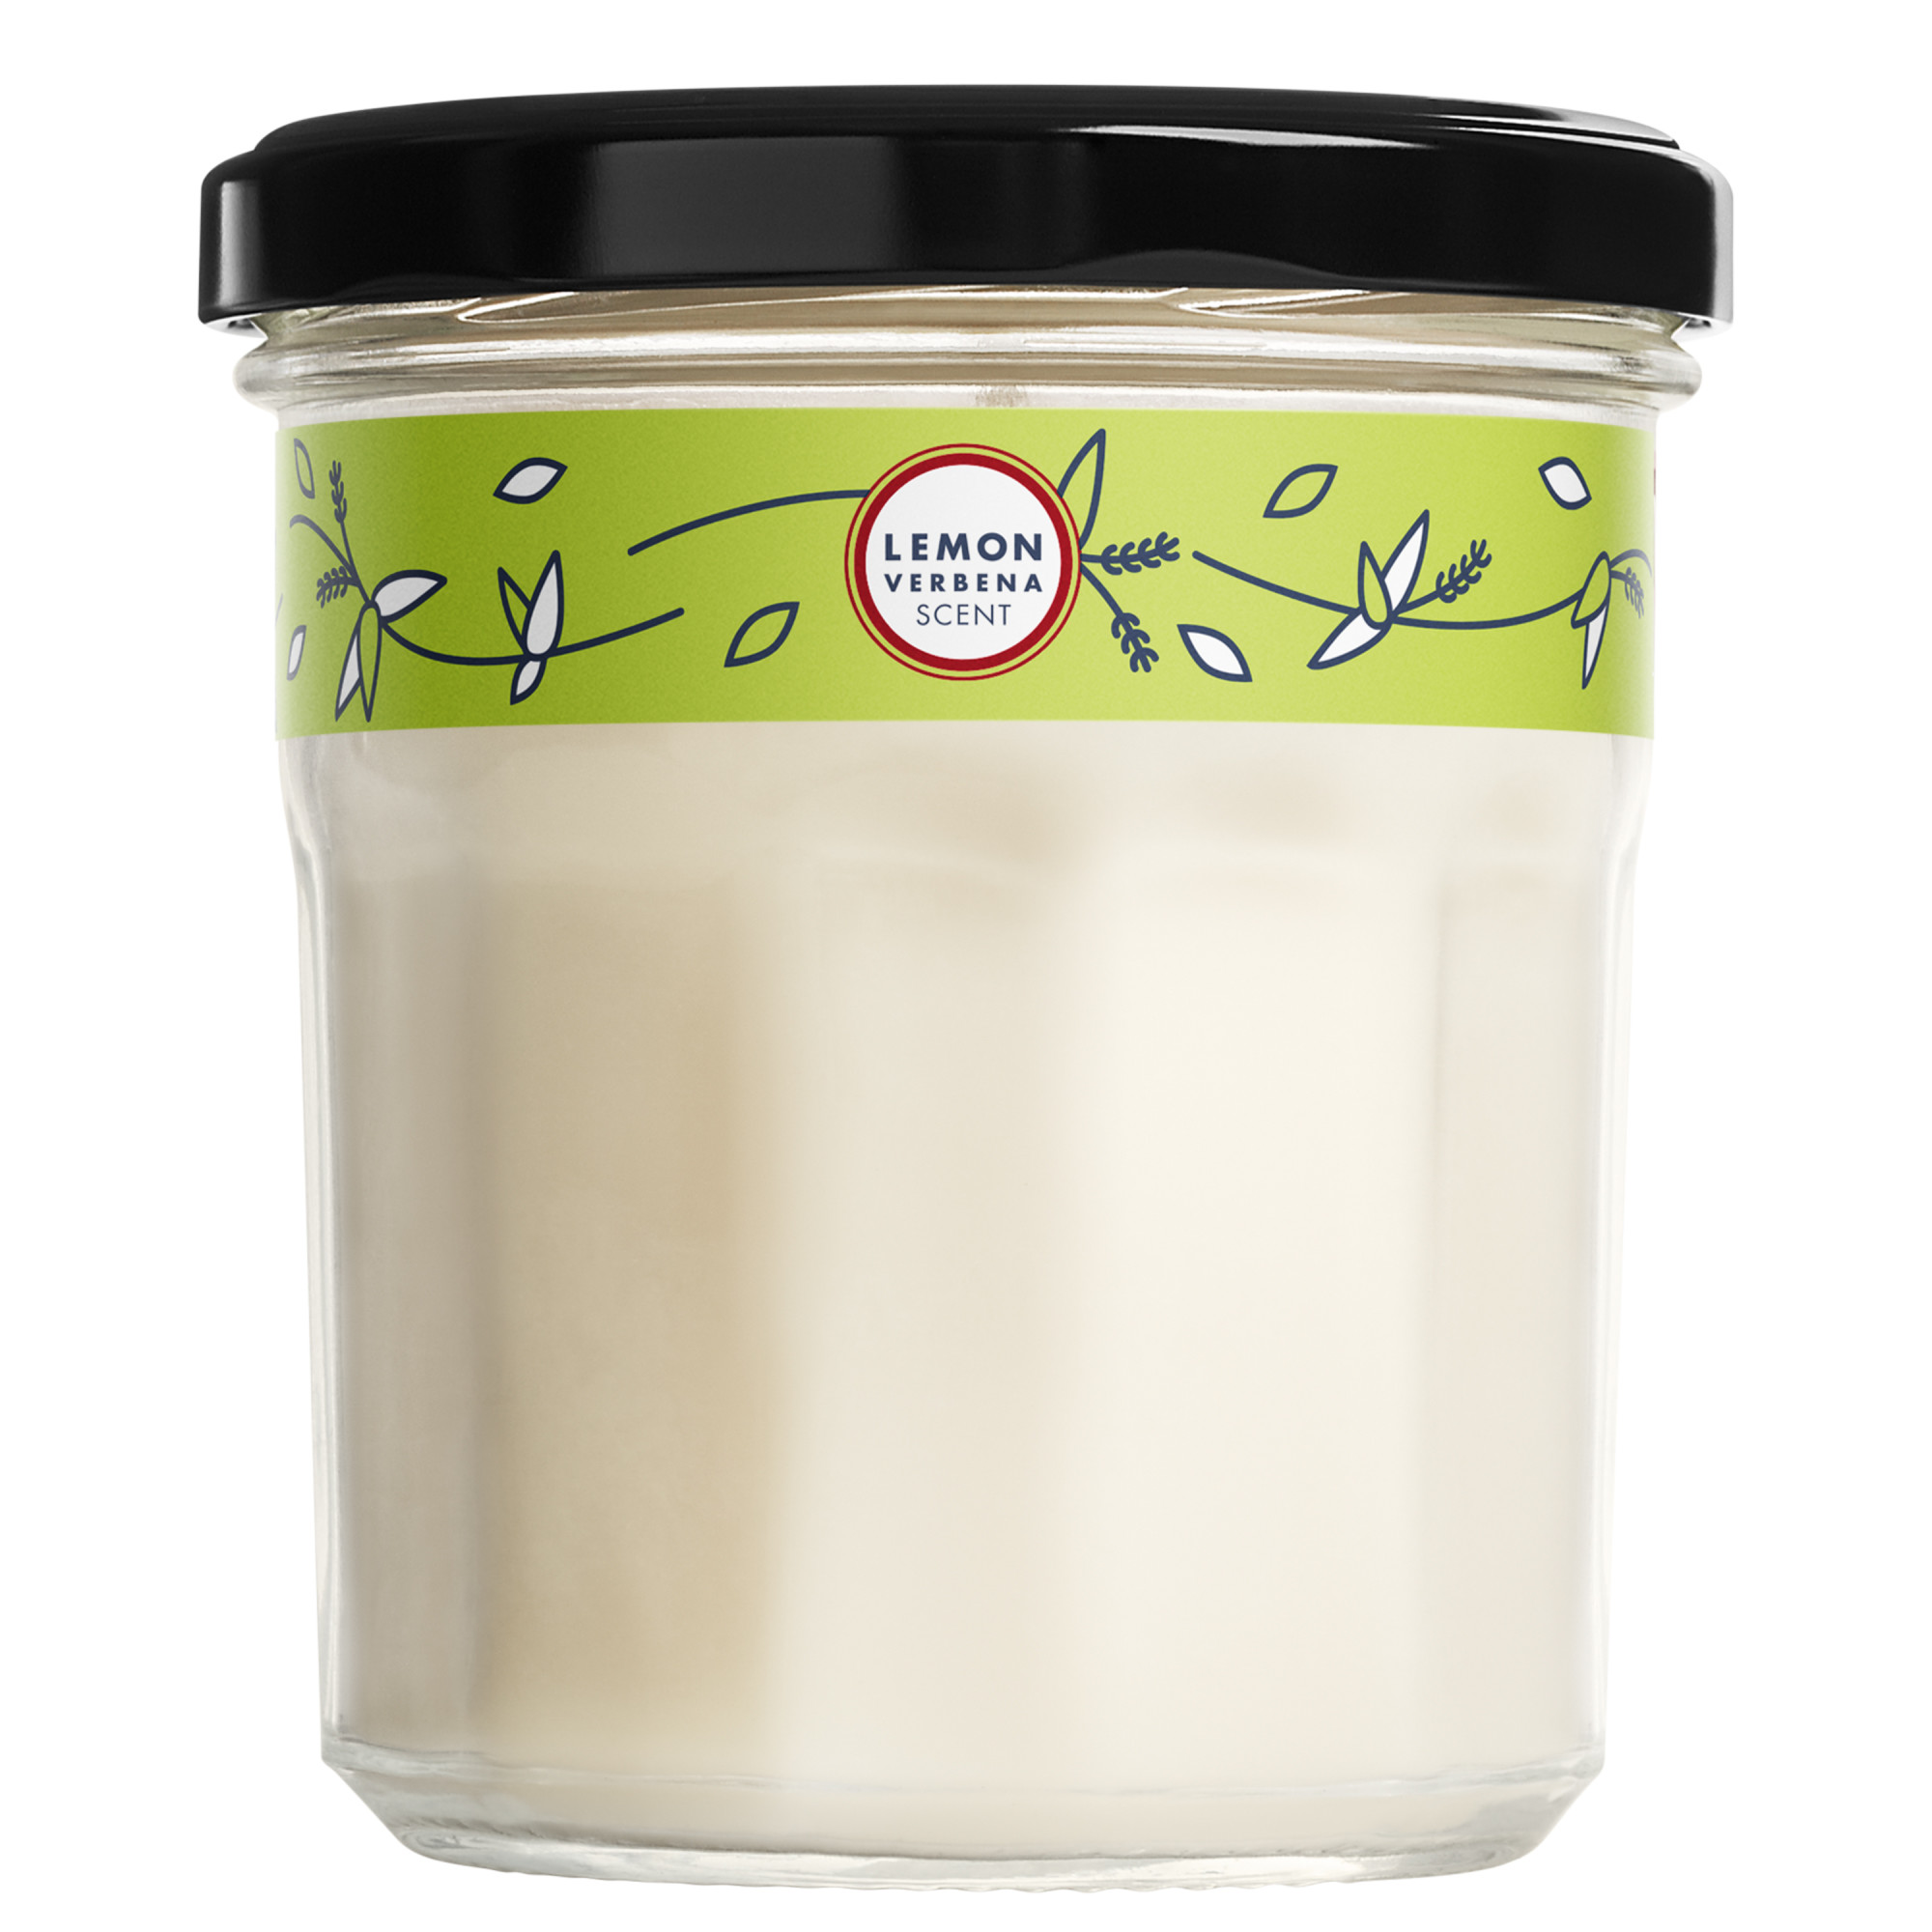 Mrs. Meyer's Clean Day Scented Soy Candle, Large, Lemon Verbena Scent, 7.2 Ounce Candle - image 1 of 6